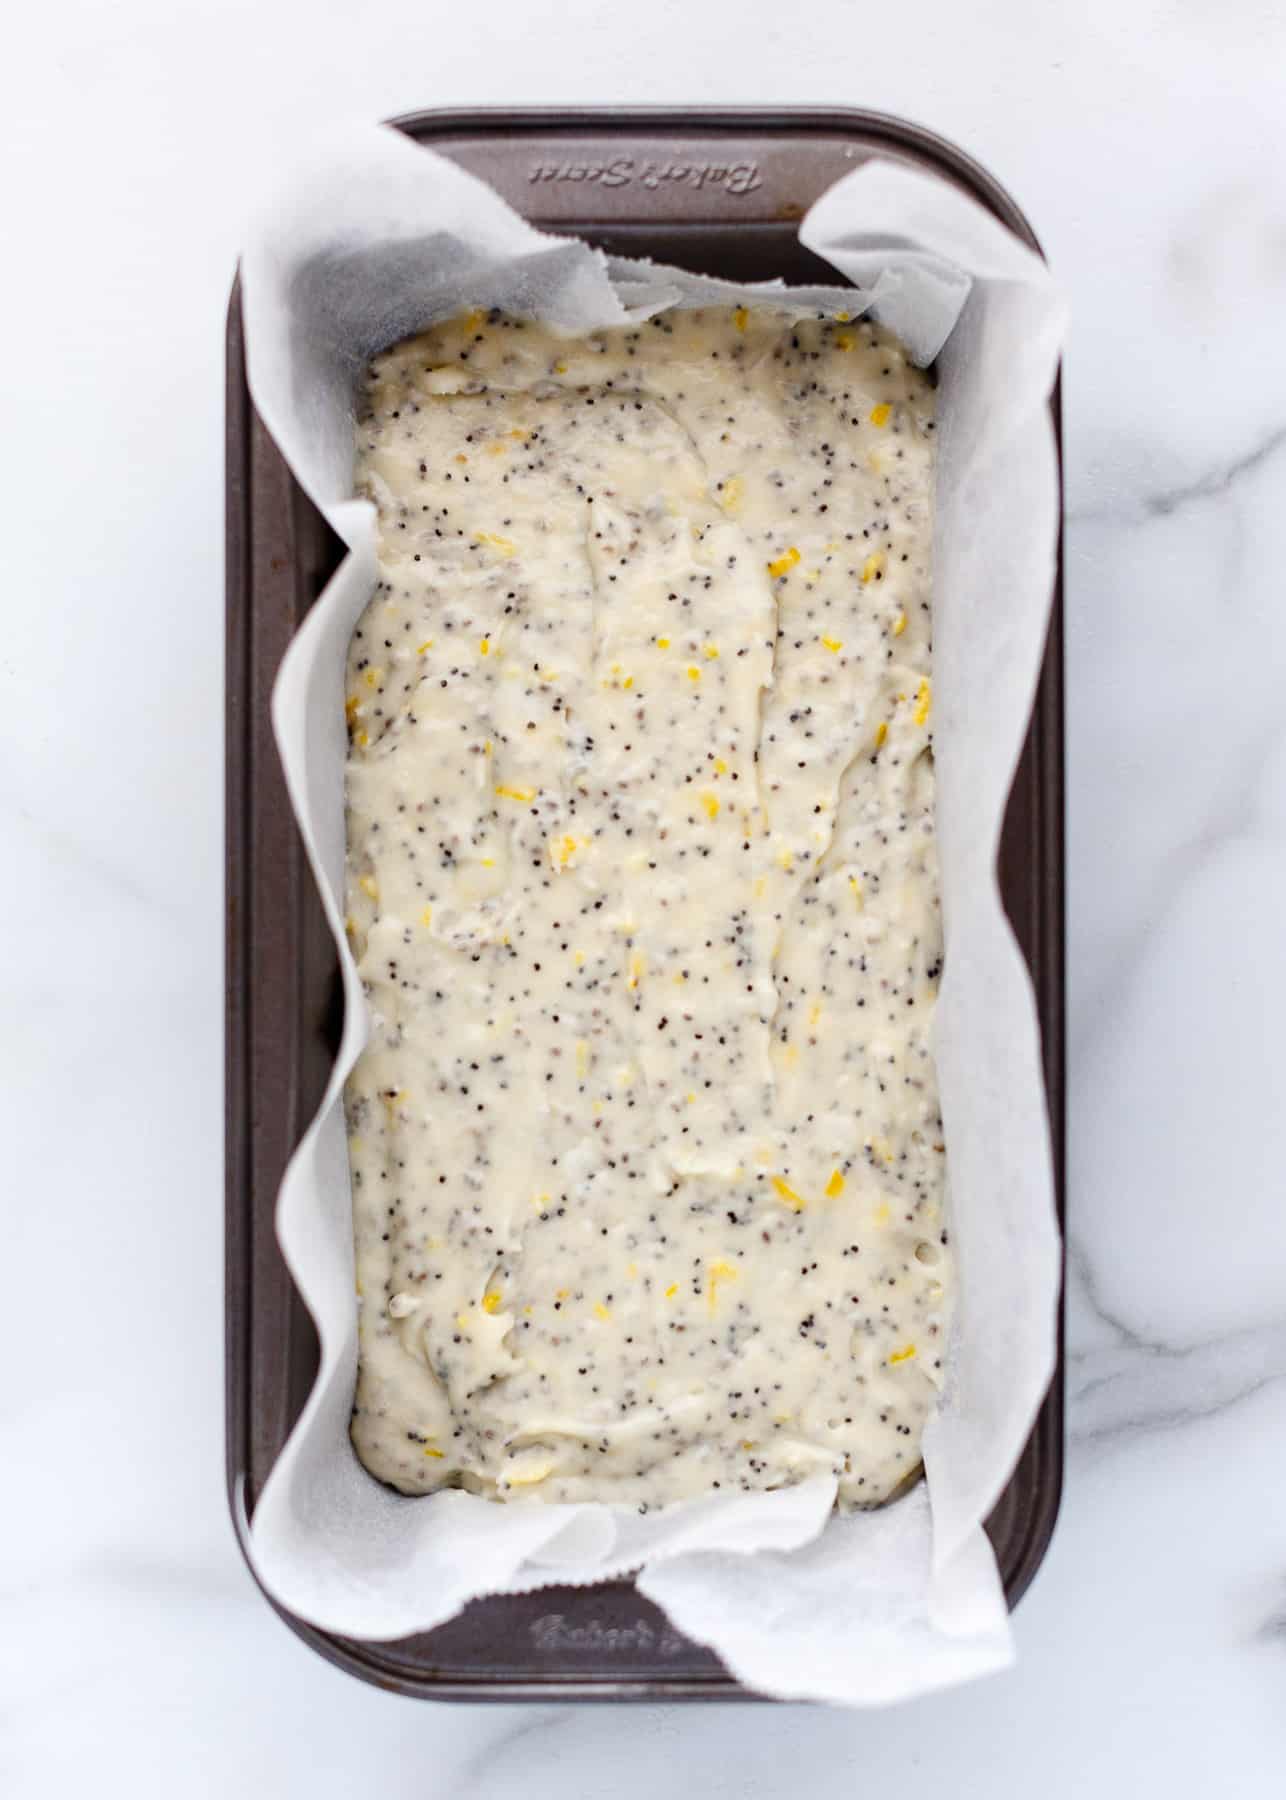 Vegan Lemon Poppy Seed Cake batter in a loaf pan lined with parchment paper.